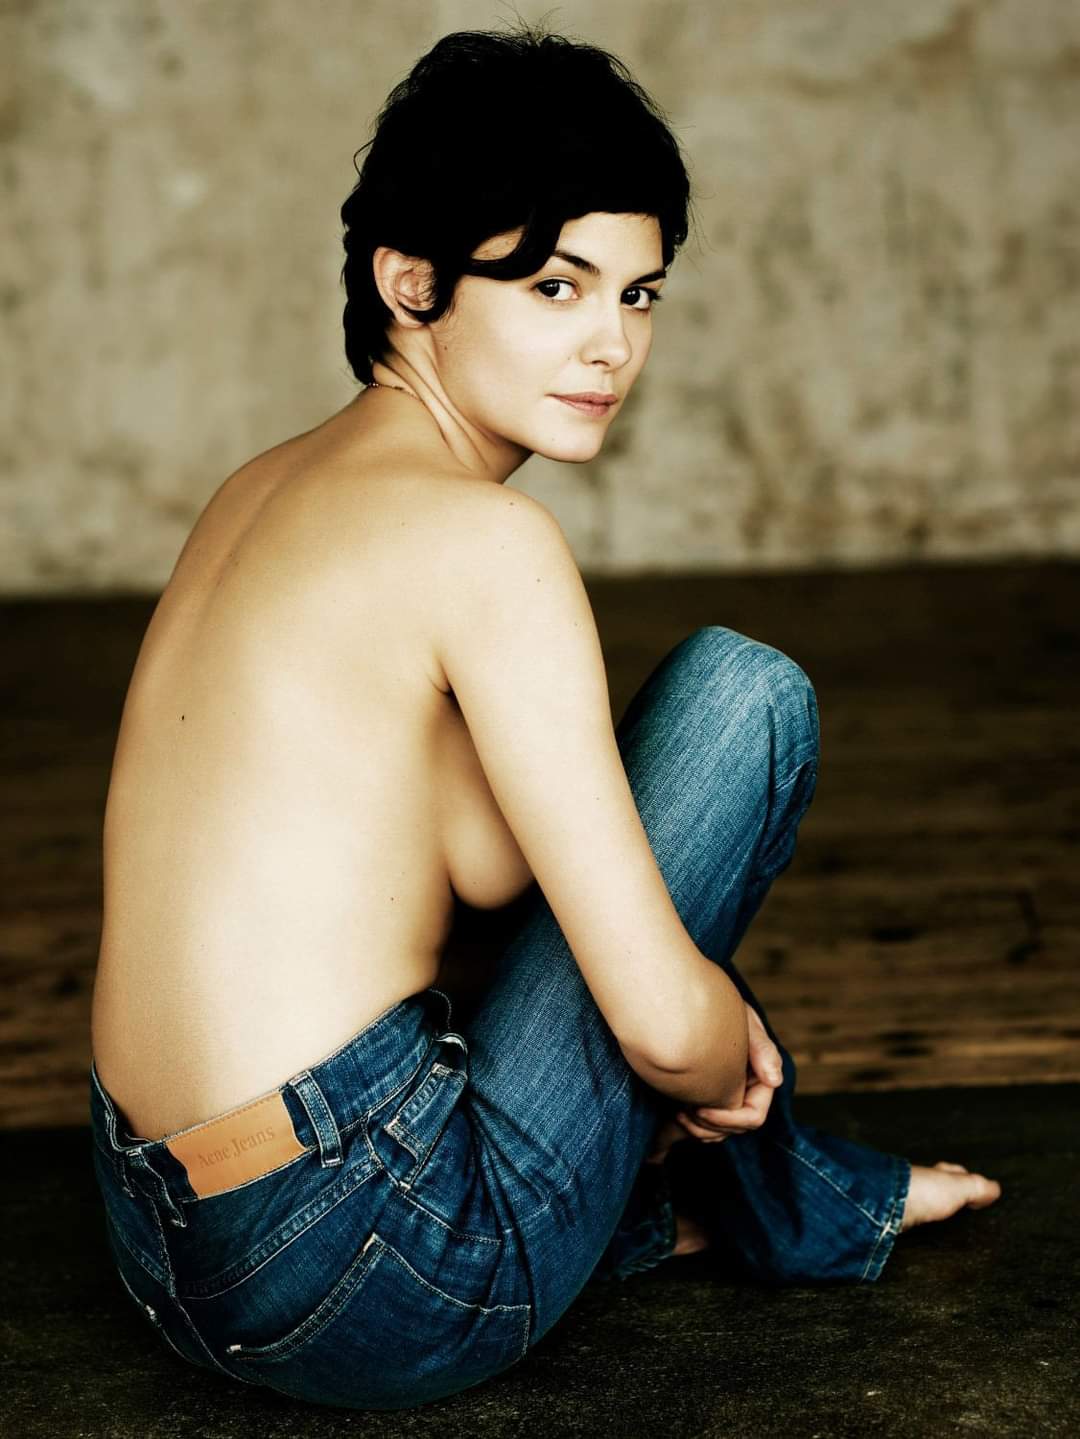 marysocontrary on Twitter: "Audrey Tautou https://t.co/ET34QbRxvJ"...